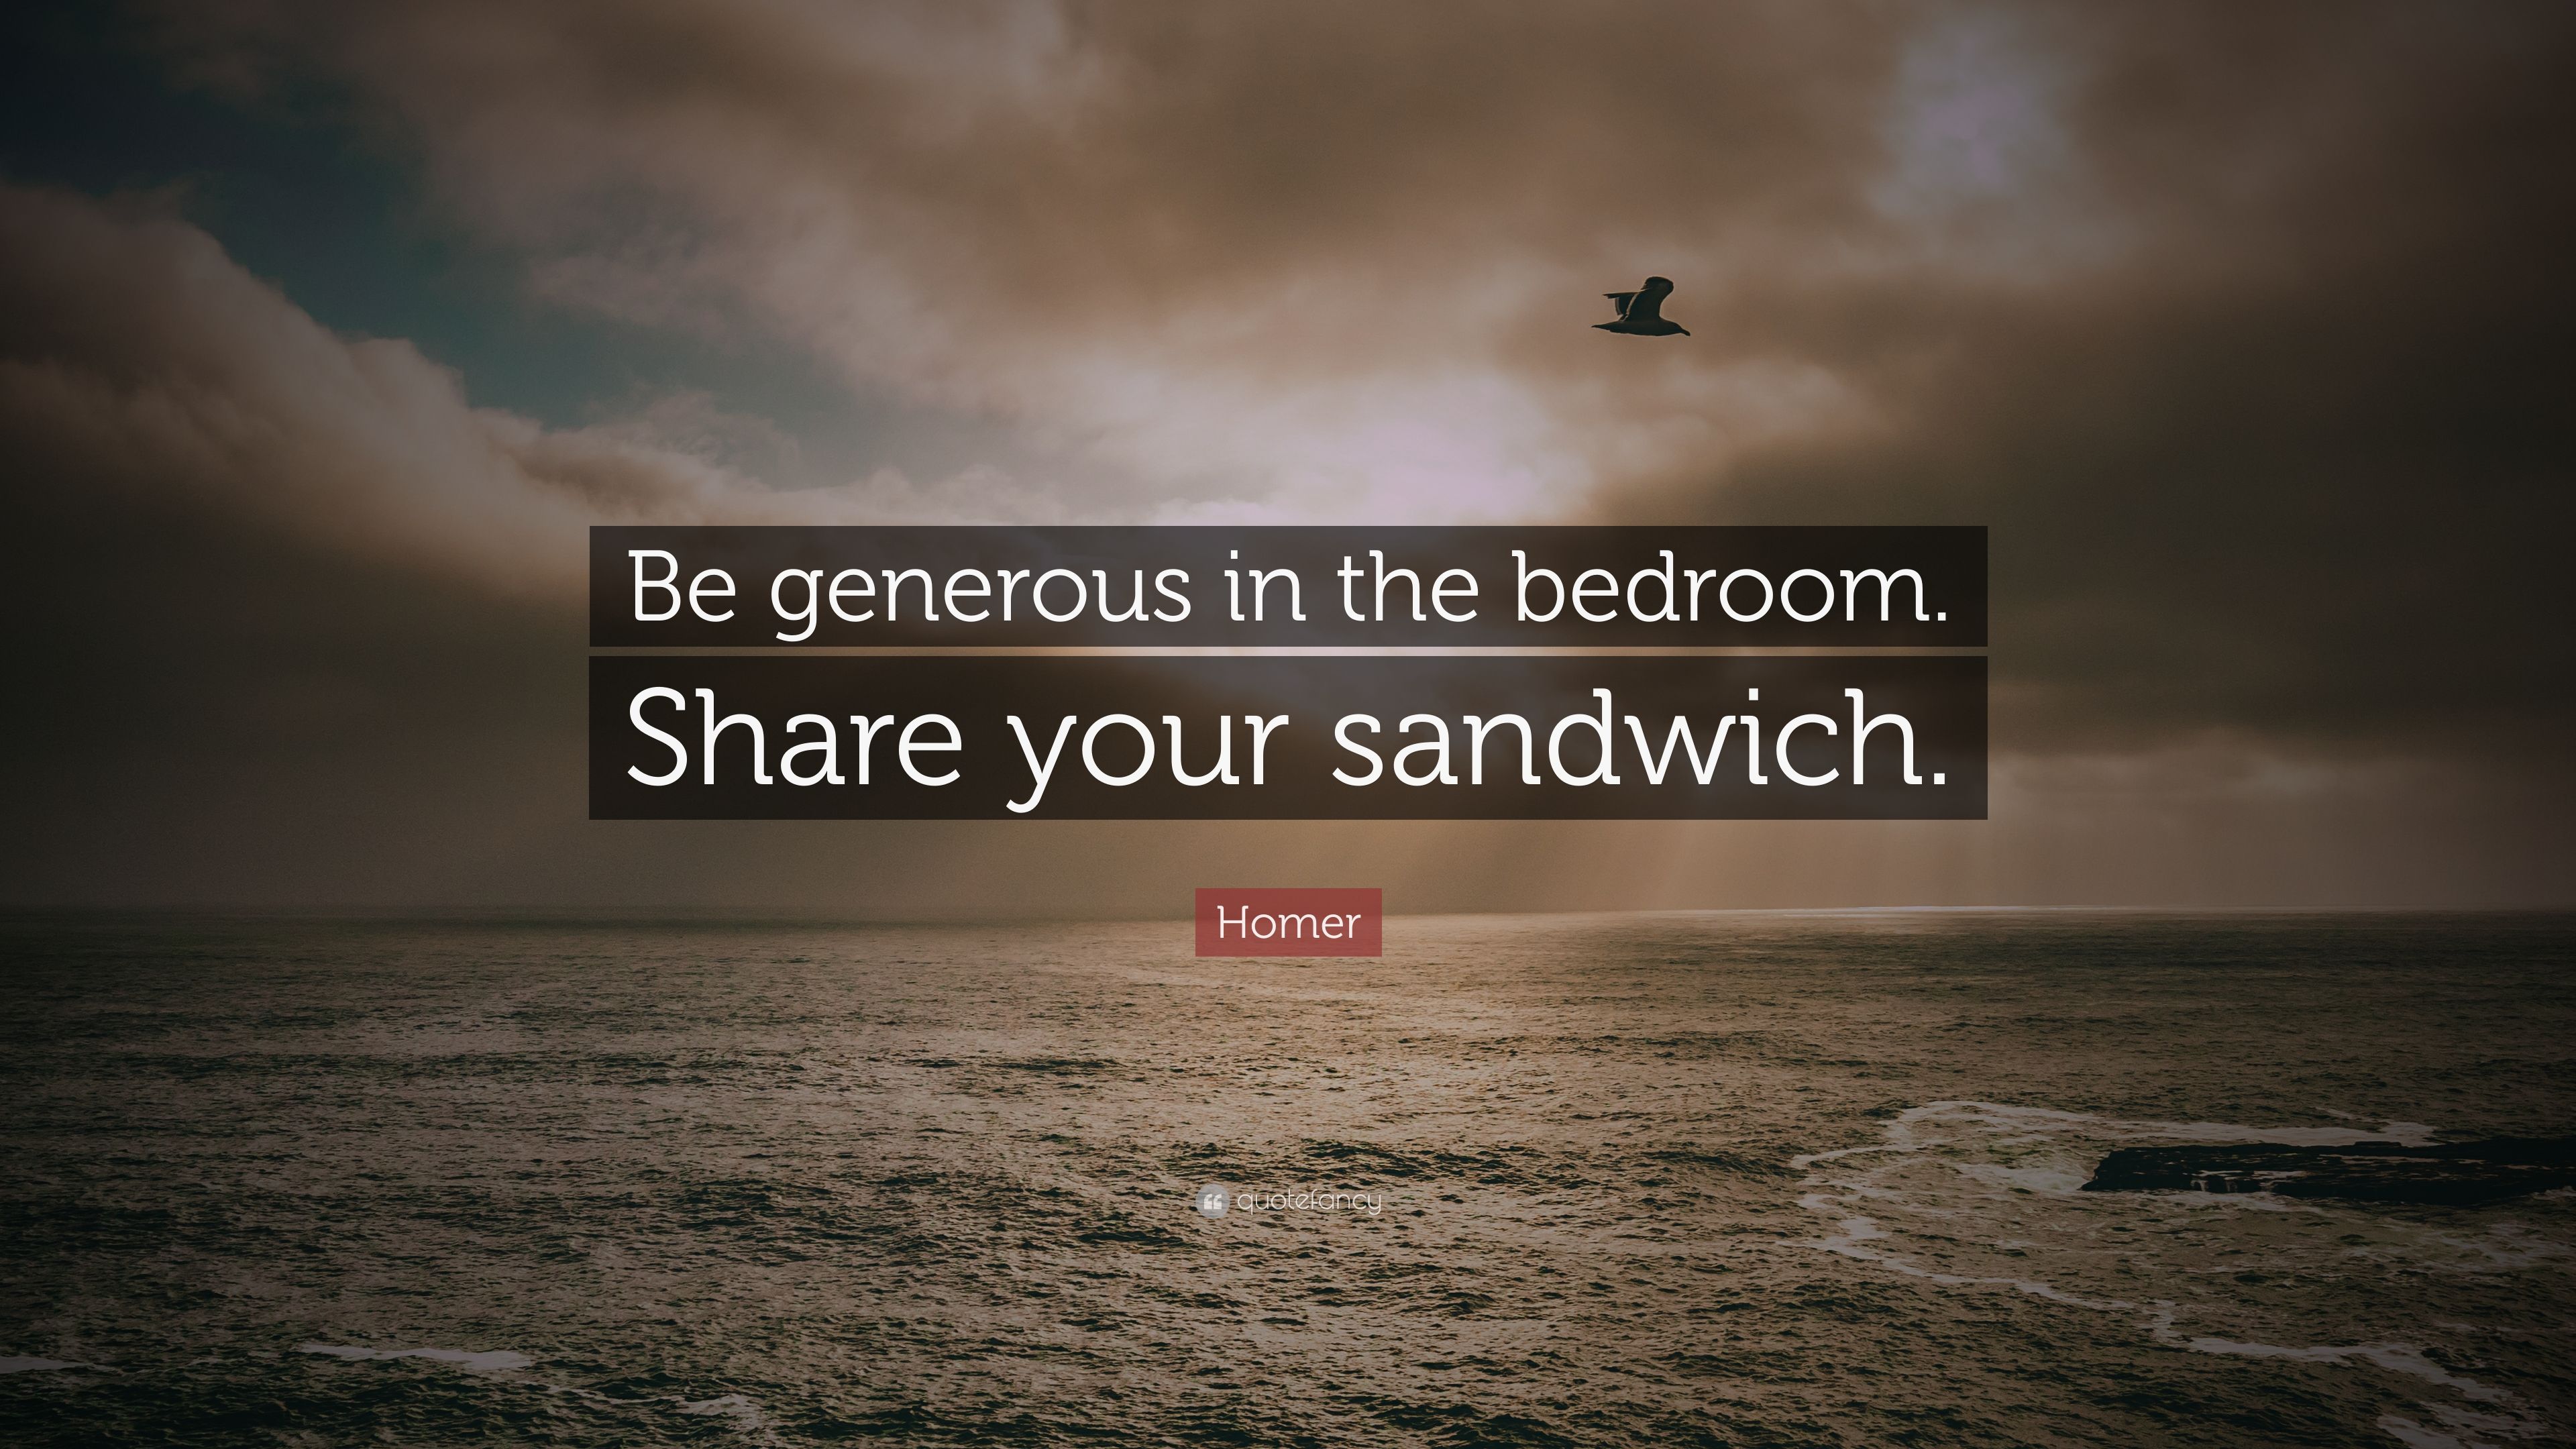 Homer Quote: “Be generous in the bedroom. Share your sandwich.”